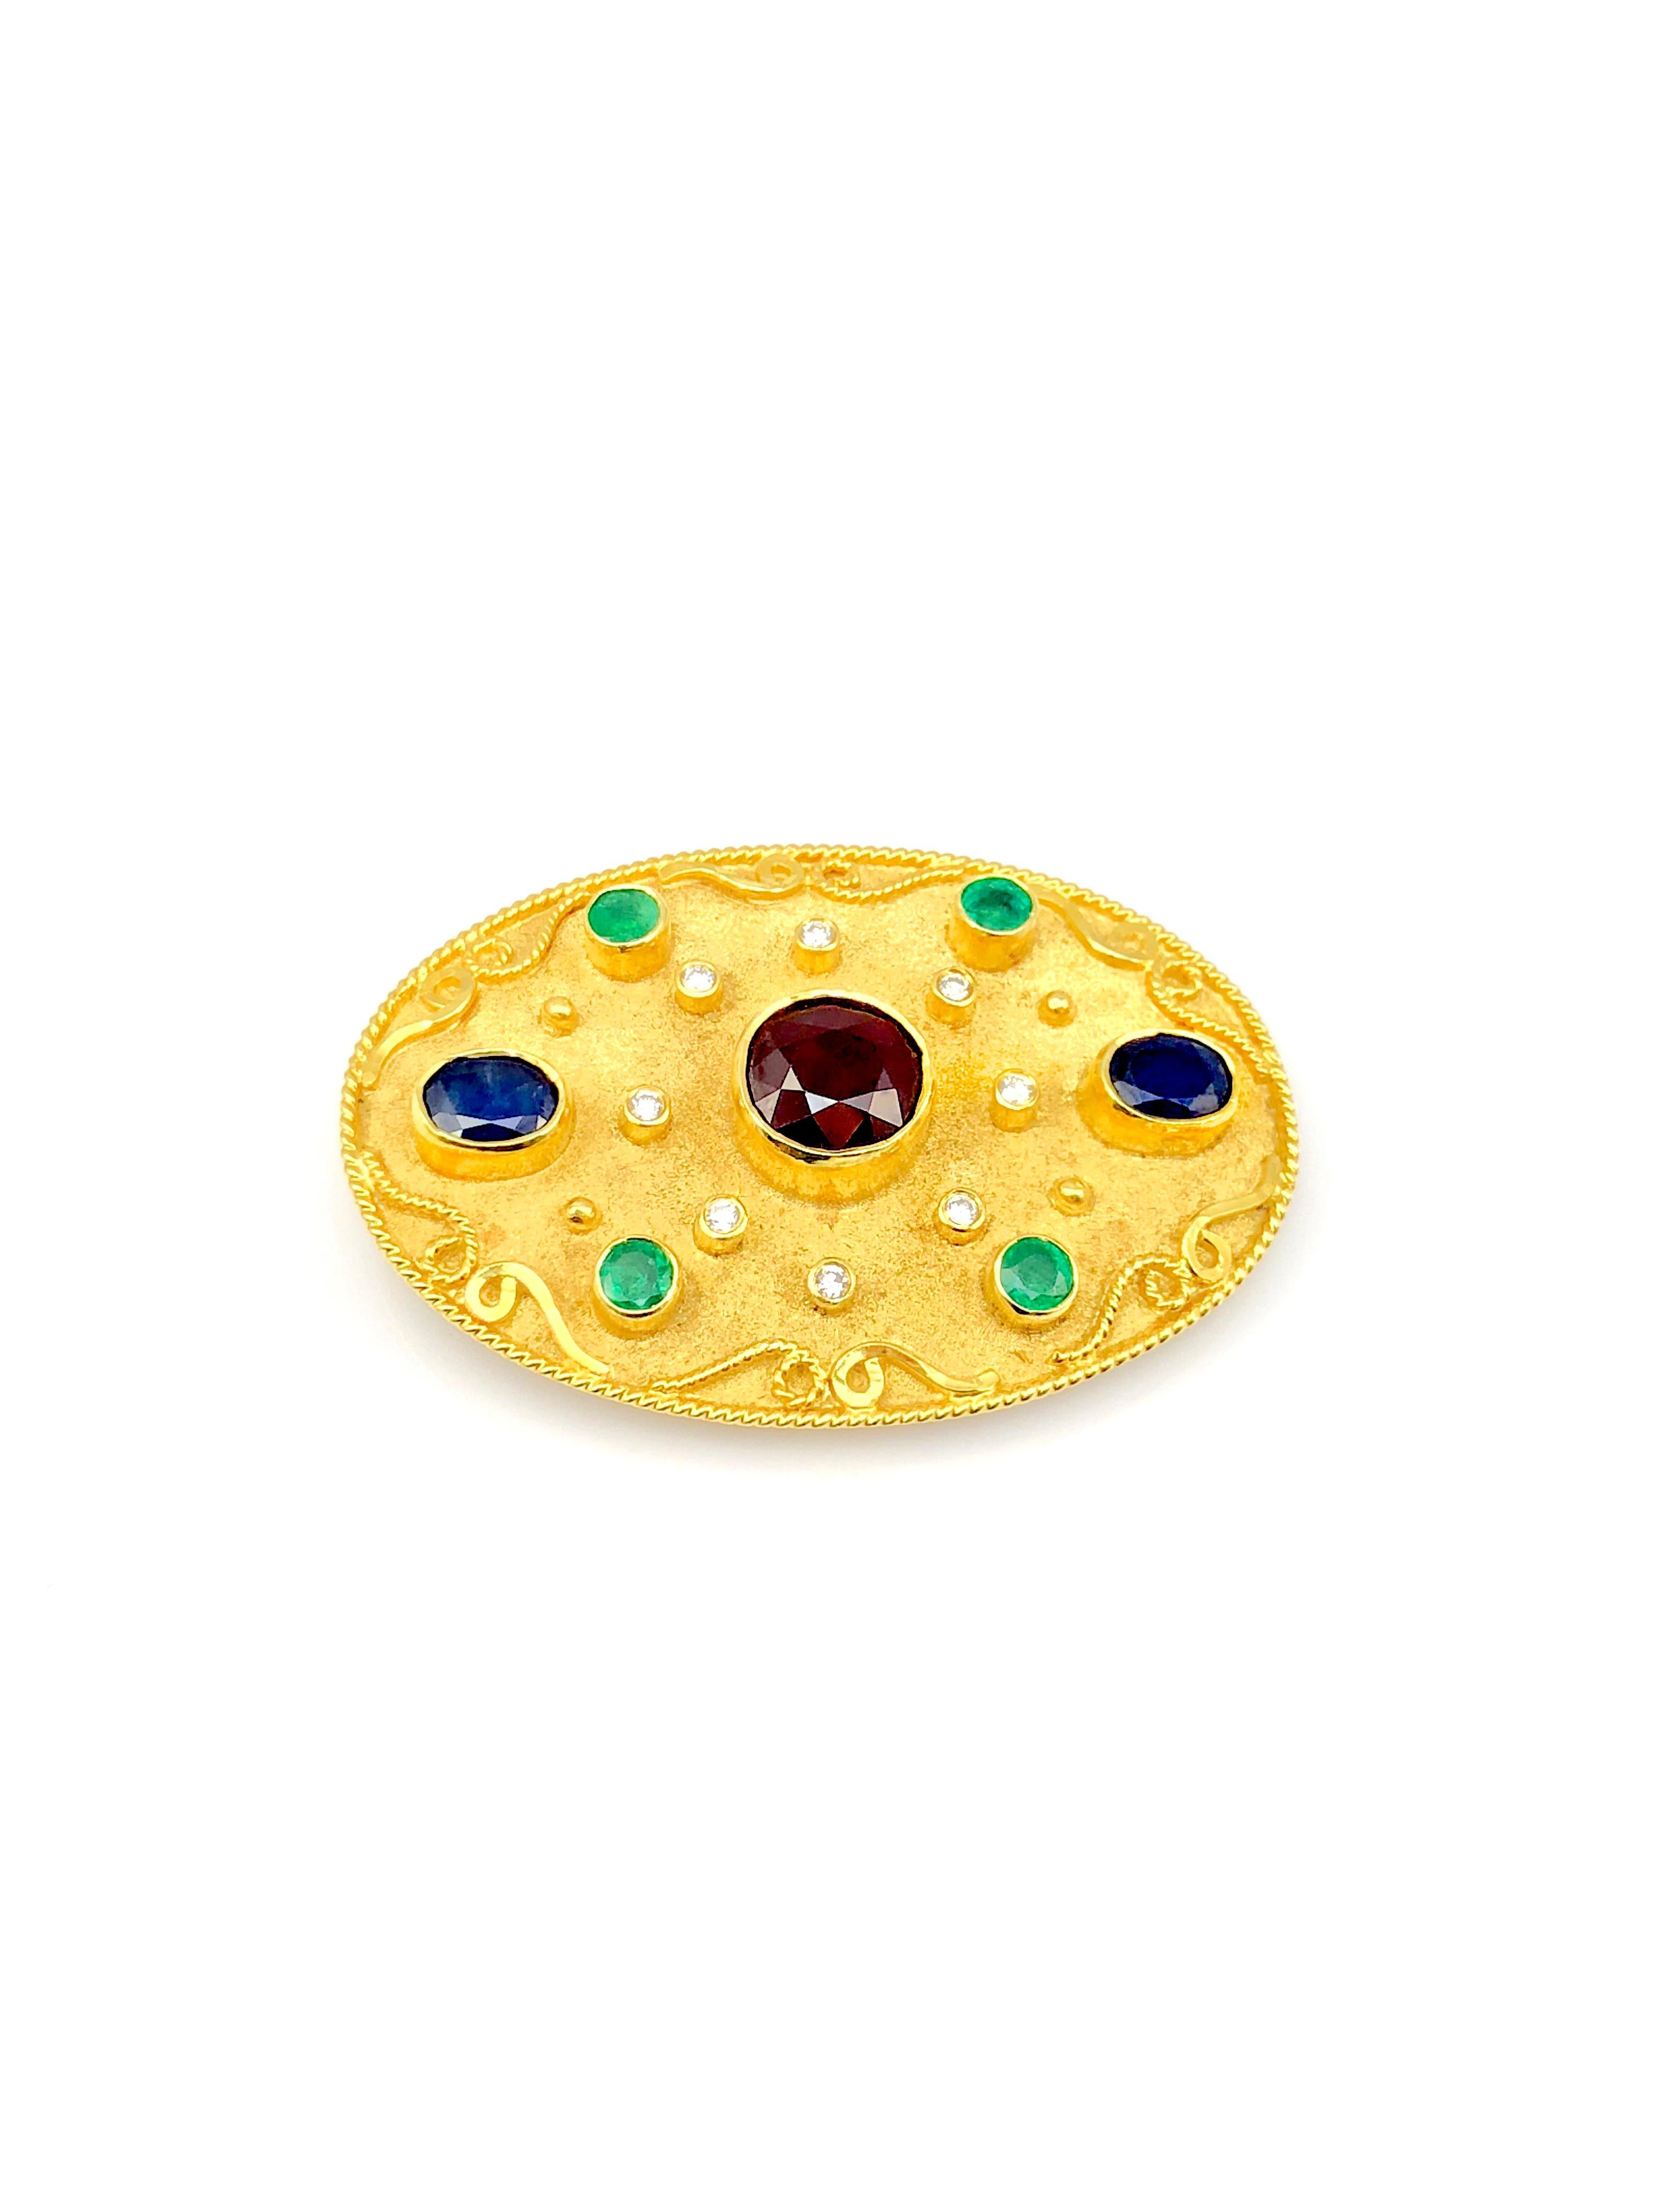 S.Georgios designer Pendant - Brooch is all handmade from solid 18 Karat White Gold and custom-made. This stunning jewel is microscopically decorated with granulation work with yellow gold beads and wires and has a unique velvet background. This